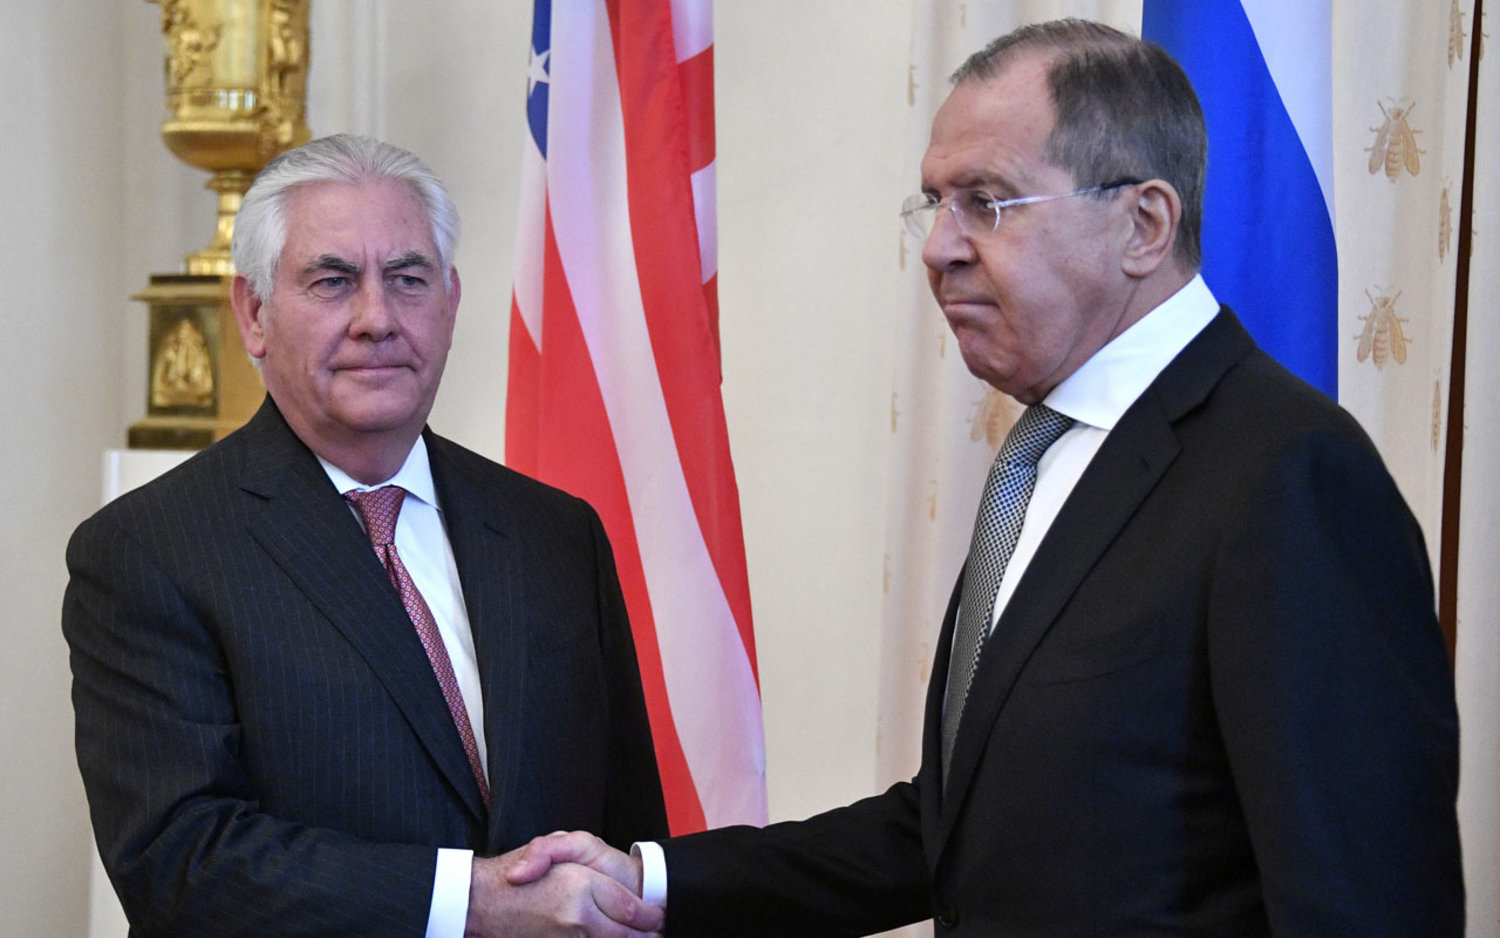 Russian Foreign Minister Sergei Lavrov (R) welcomes US Secretary of State Rex Tillerson before a meeting in Moscow on April 12, 2017. AFP photo